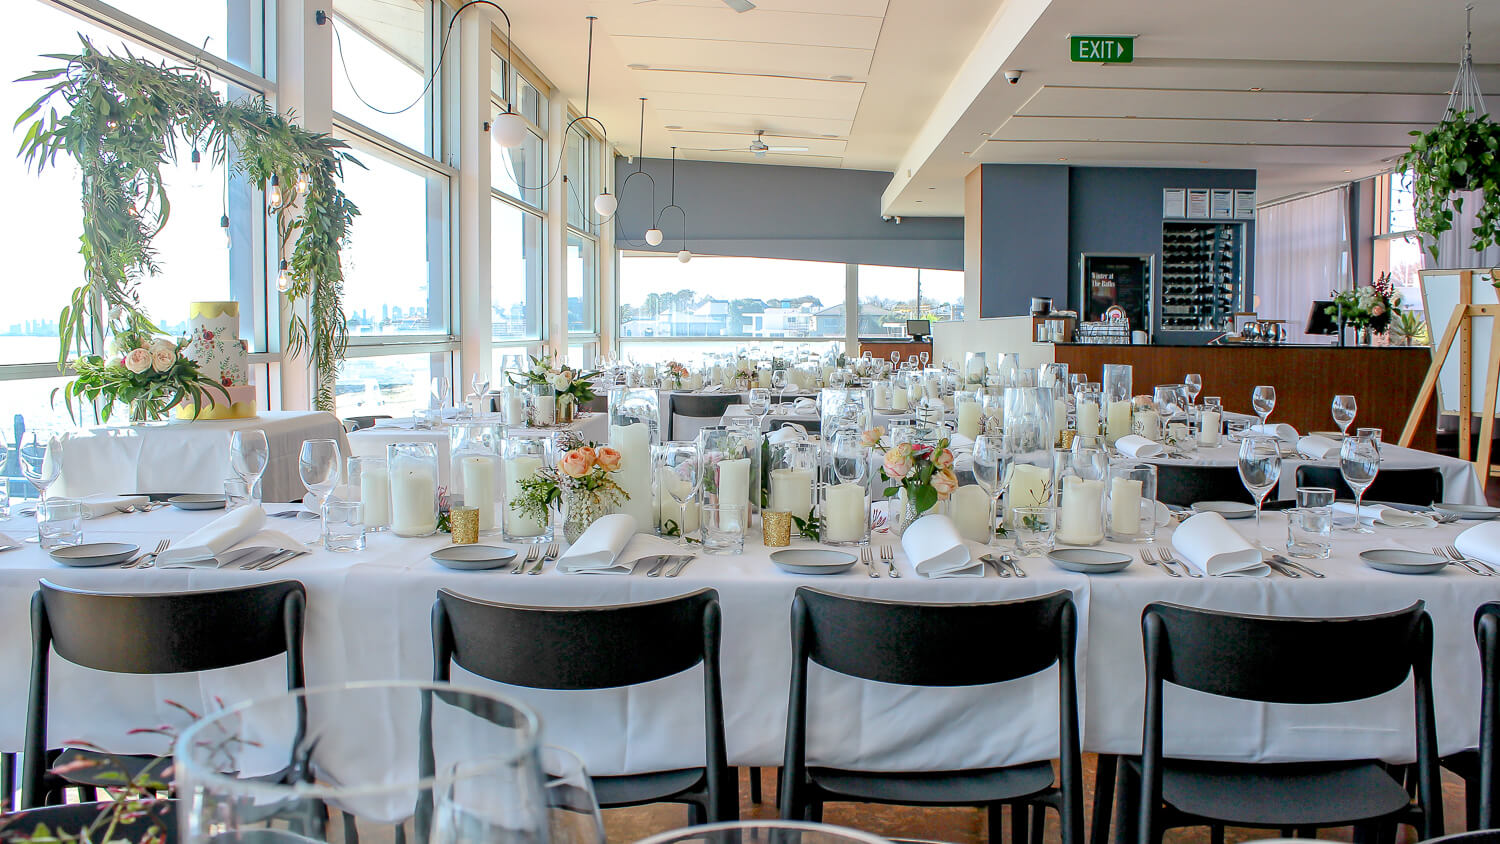 Wedding Table with Glass Vases with Candles Hire Melbourne